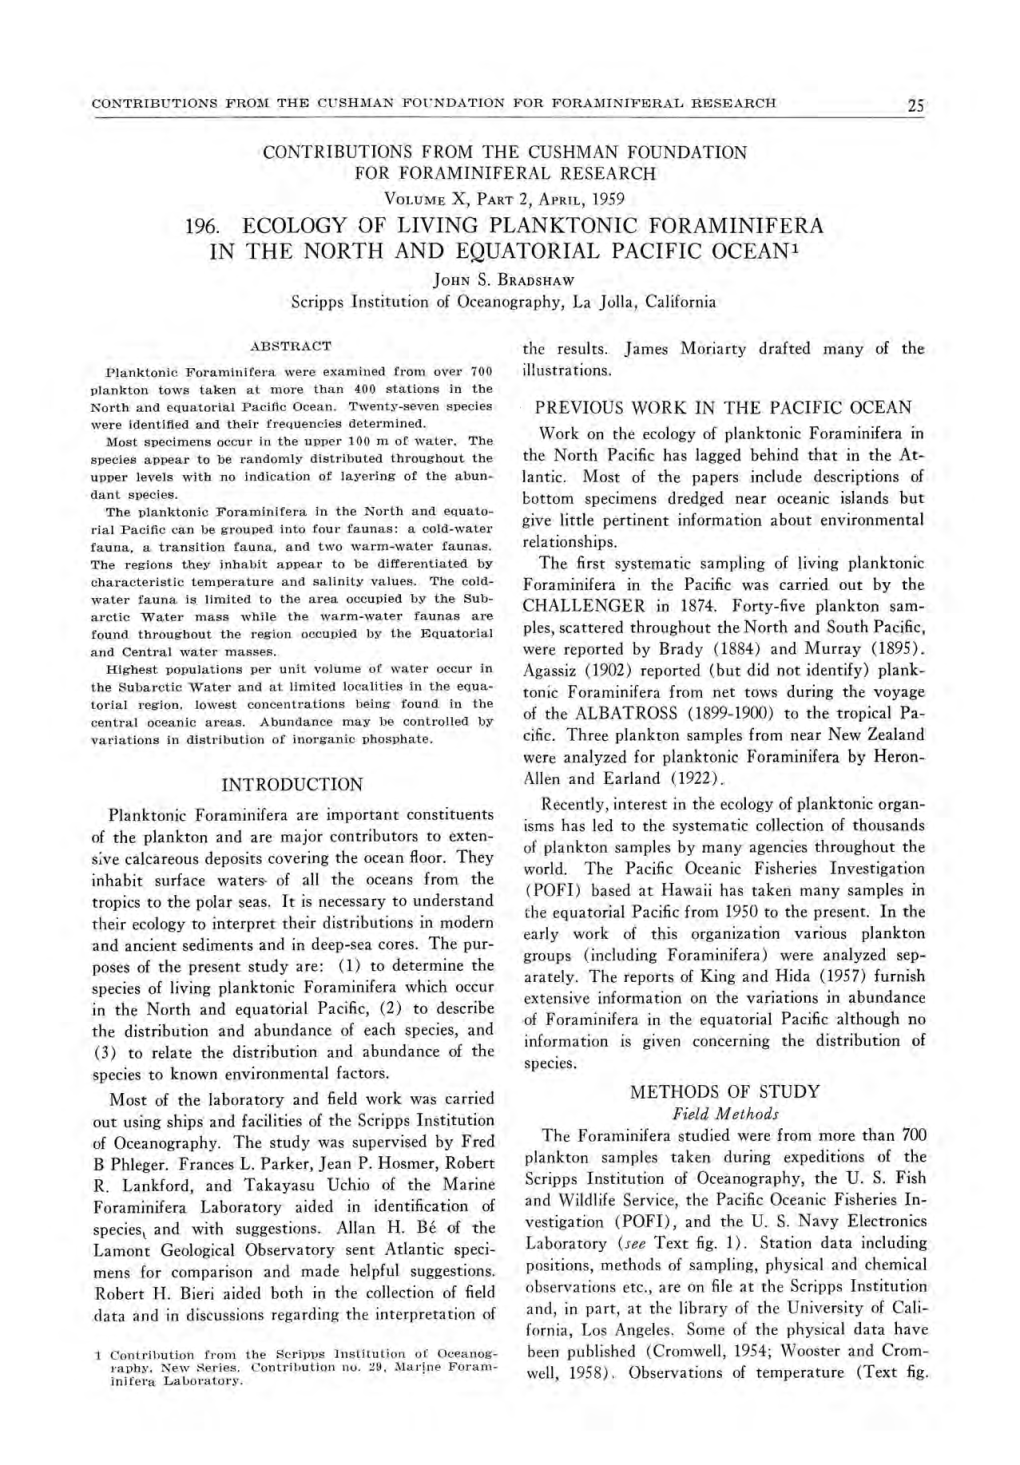 196. ECOLOGY of LIVING PLANKTONIC FORAMINIFERA in the NORTH and EQUATORIAL PACIFIC Oceanl JOHN S